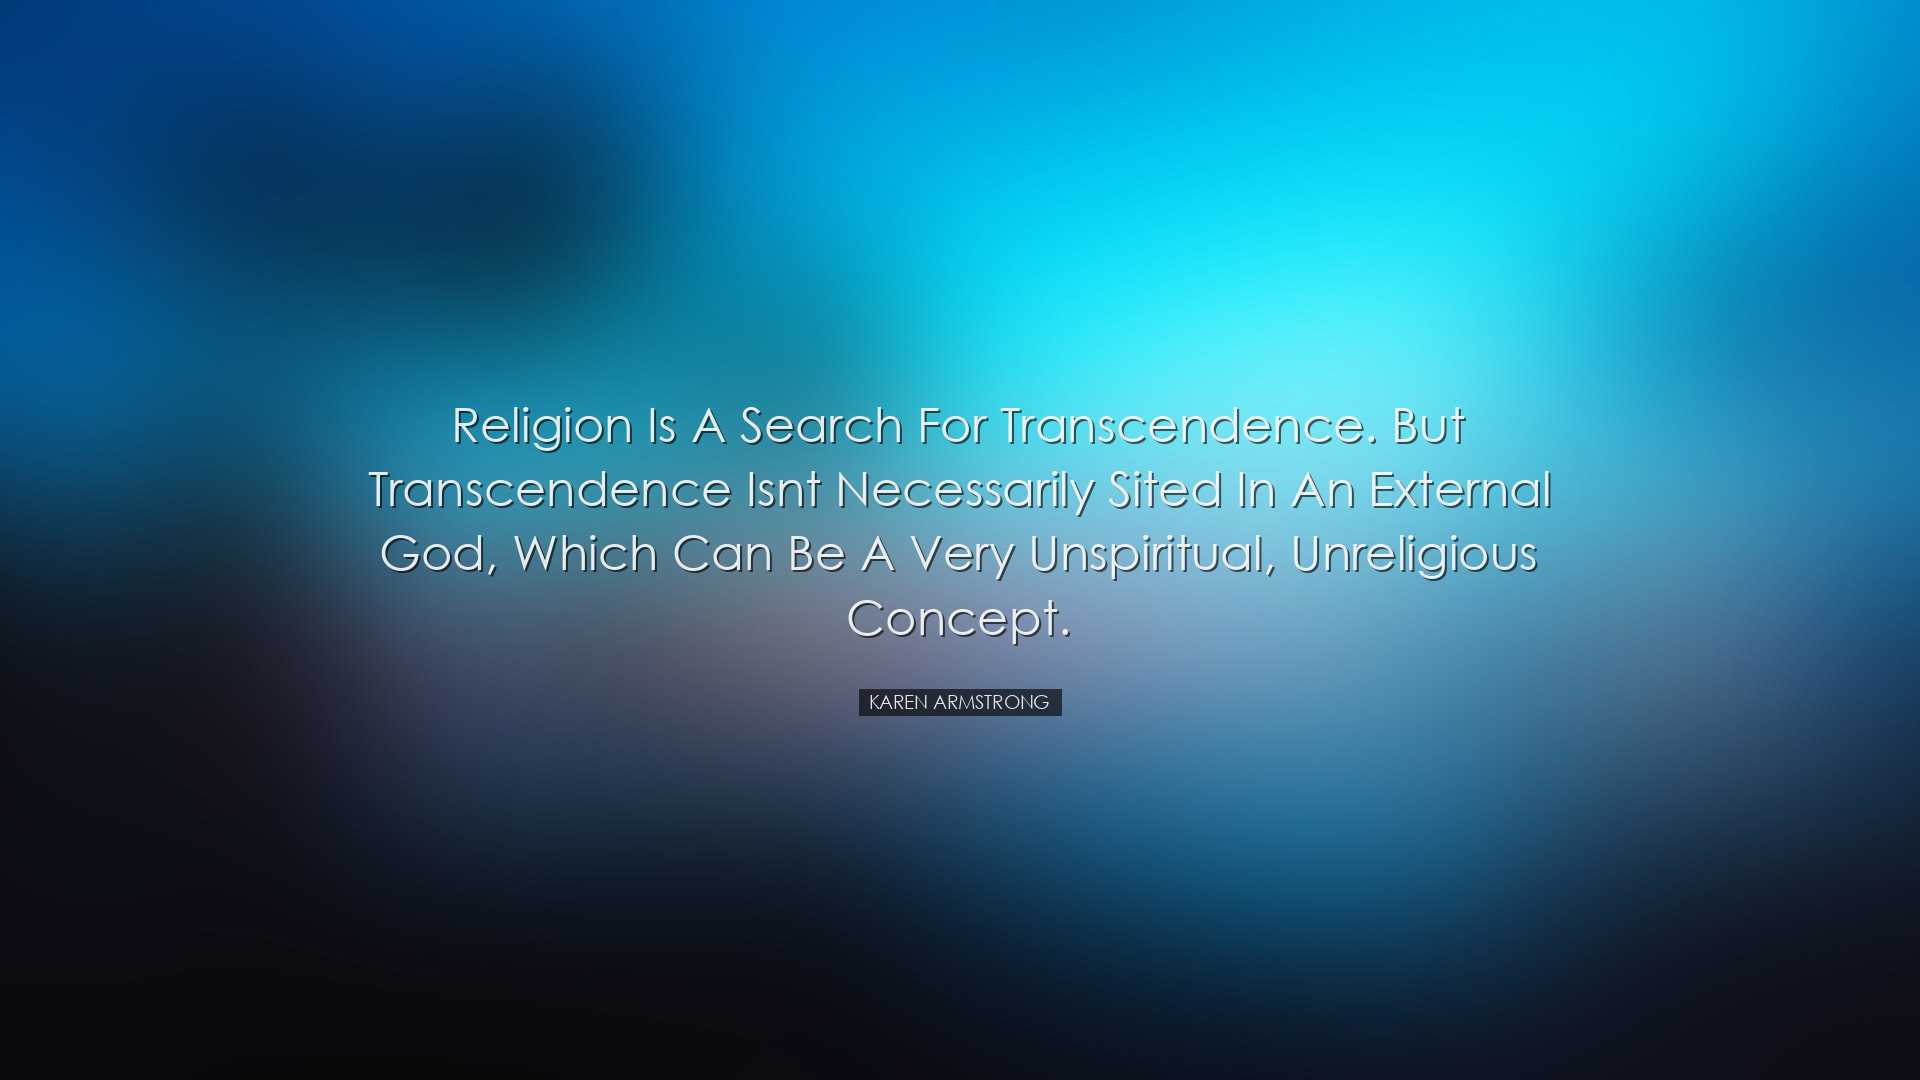 Religion is a search for transcendence. But transcendence isnt nec